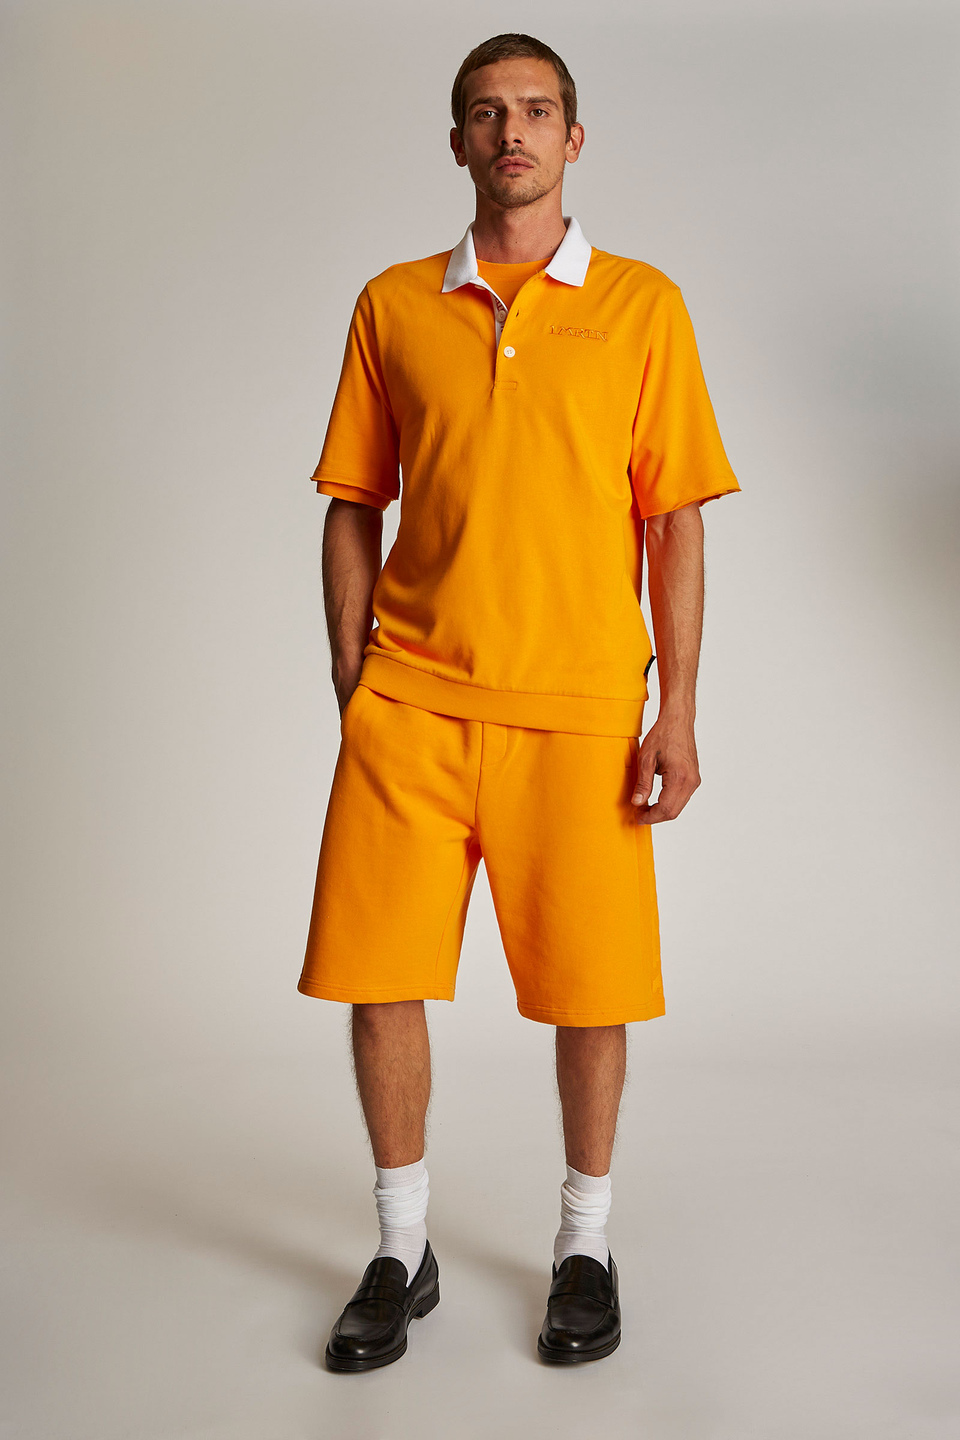 Men's oversized short-sleeved polo shirt featuring a contrasting collar - La Martina - Official Online Shop